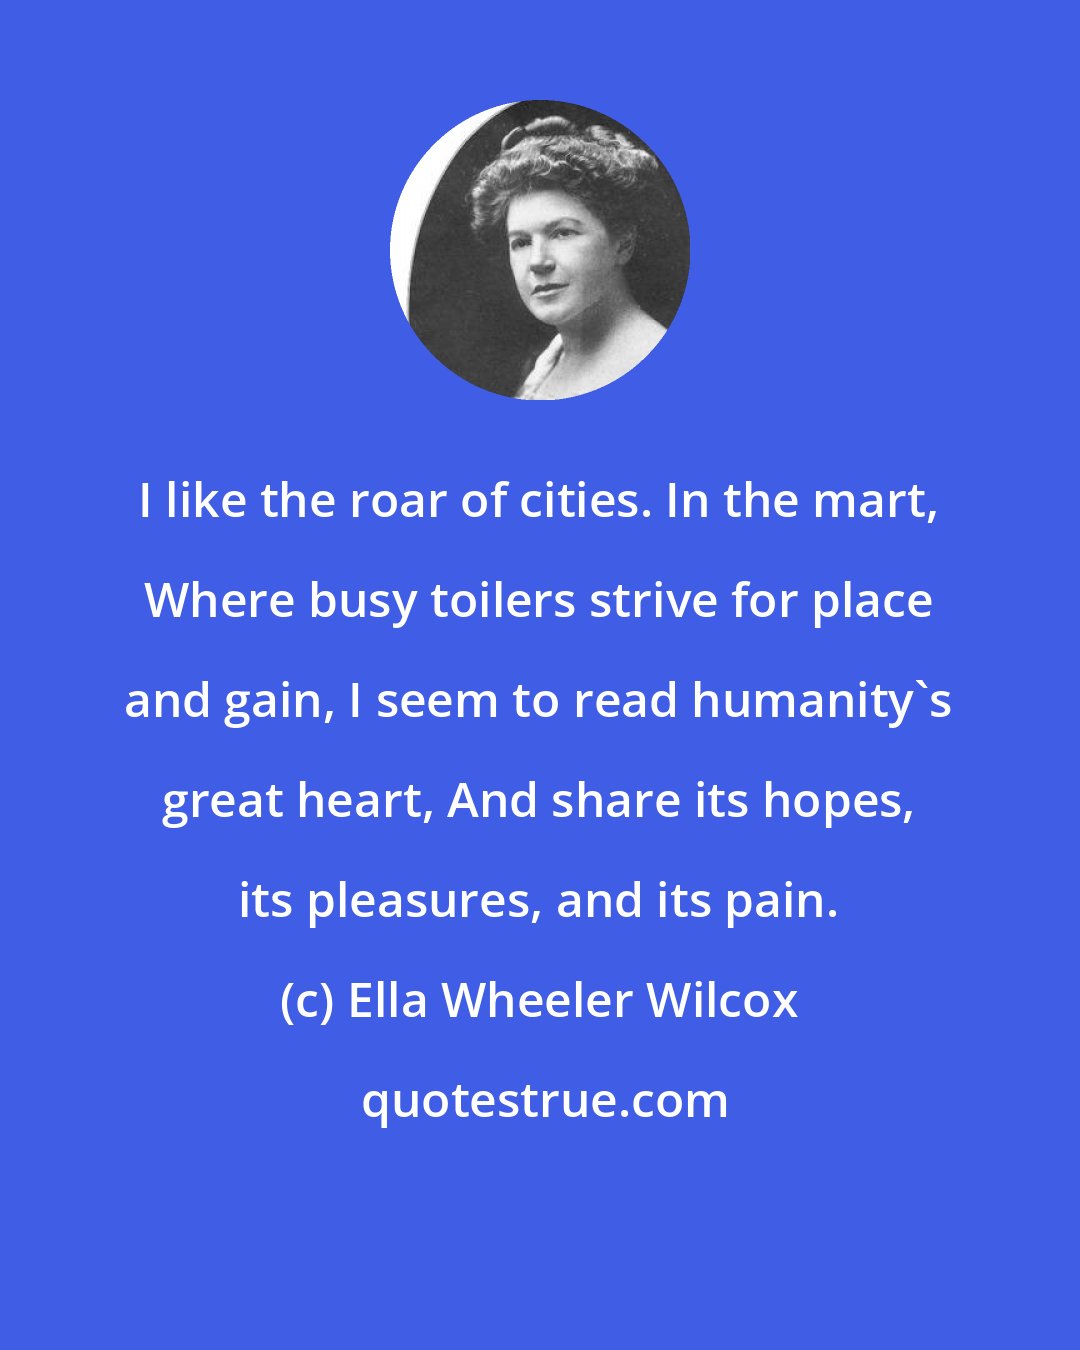 Ella Wheeler Wilcox: I like the roar of cities. In the mart, Where busy toilers strive for place and gain, I seem to read humanity's great heart, And share its hopes, its pleasures, and its pain.